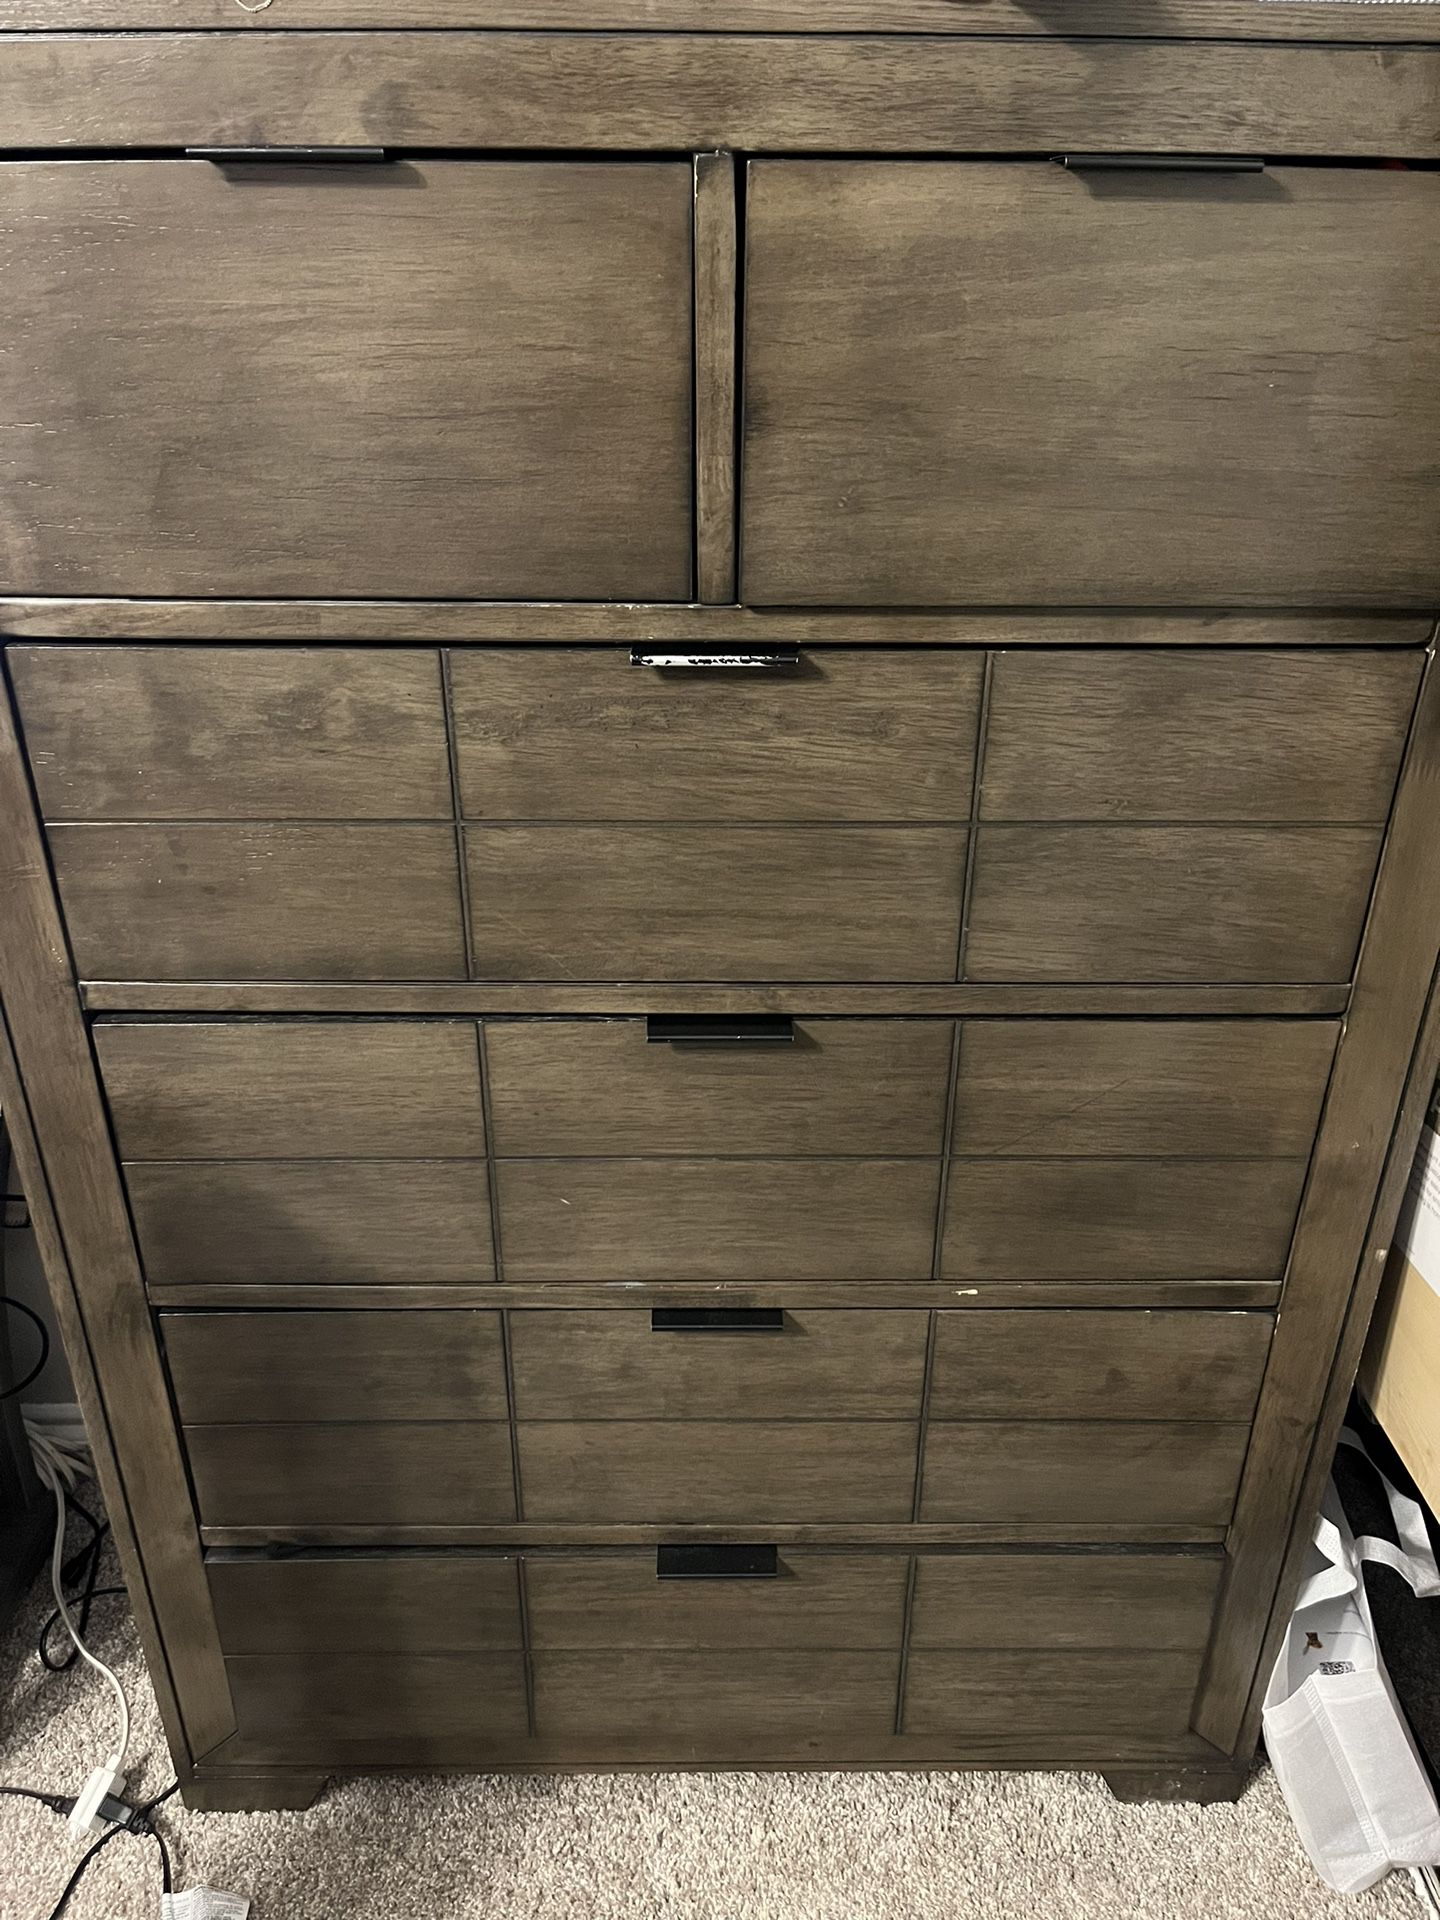  Drawer And King Size Bed Frame